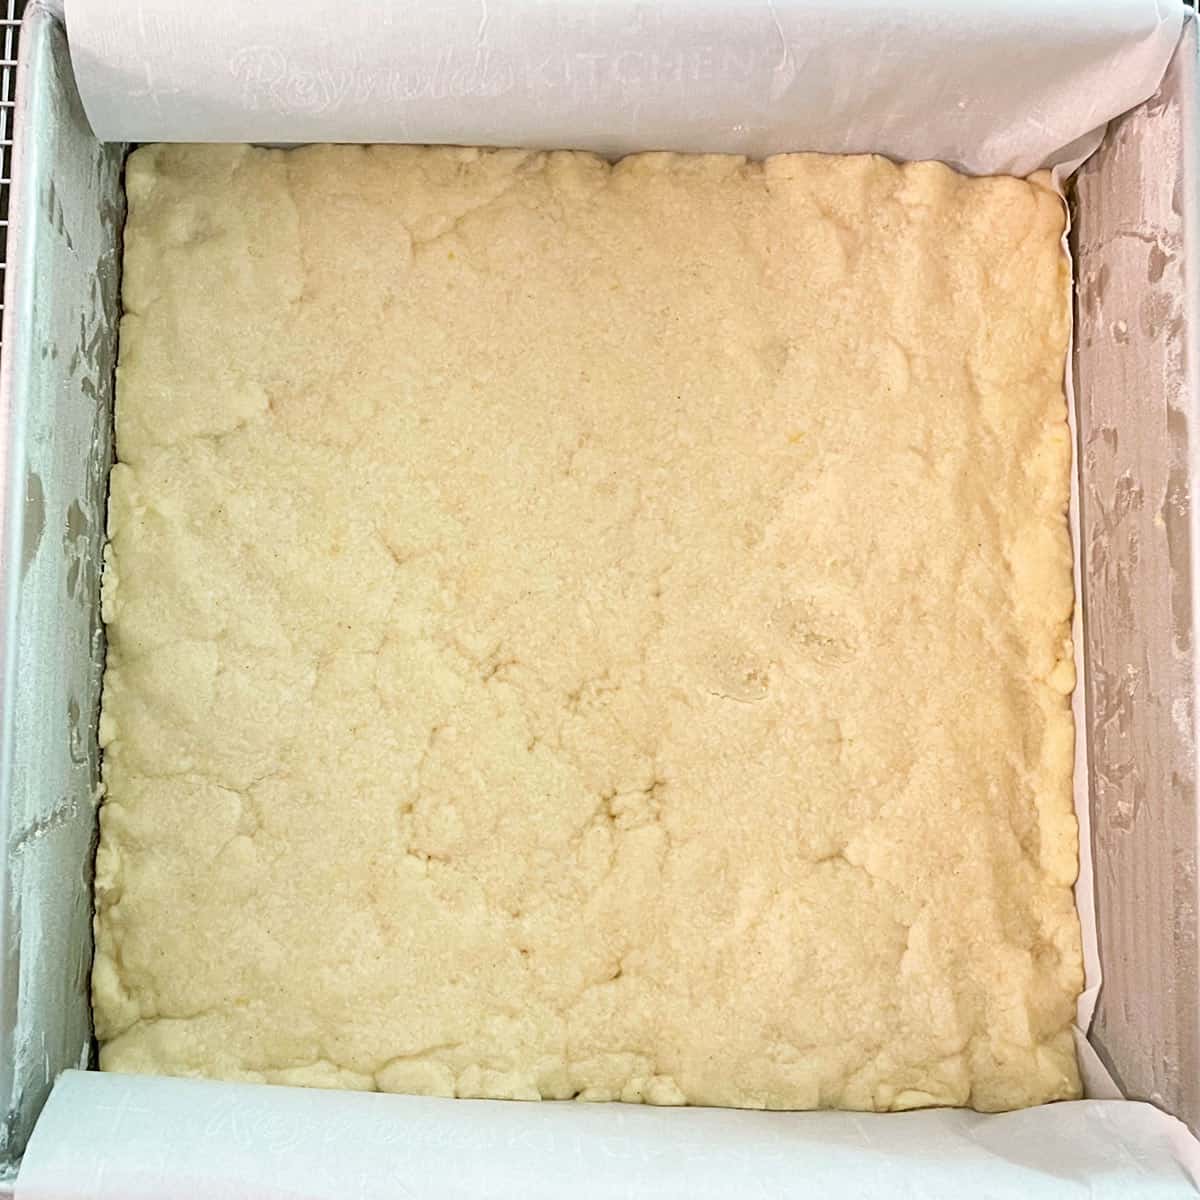 Bottom shortbread crust after baking to a golden color.